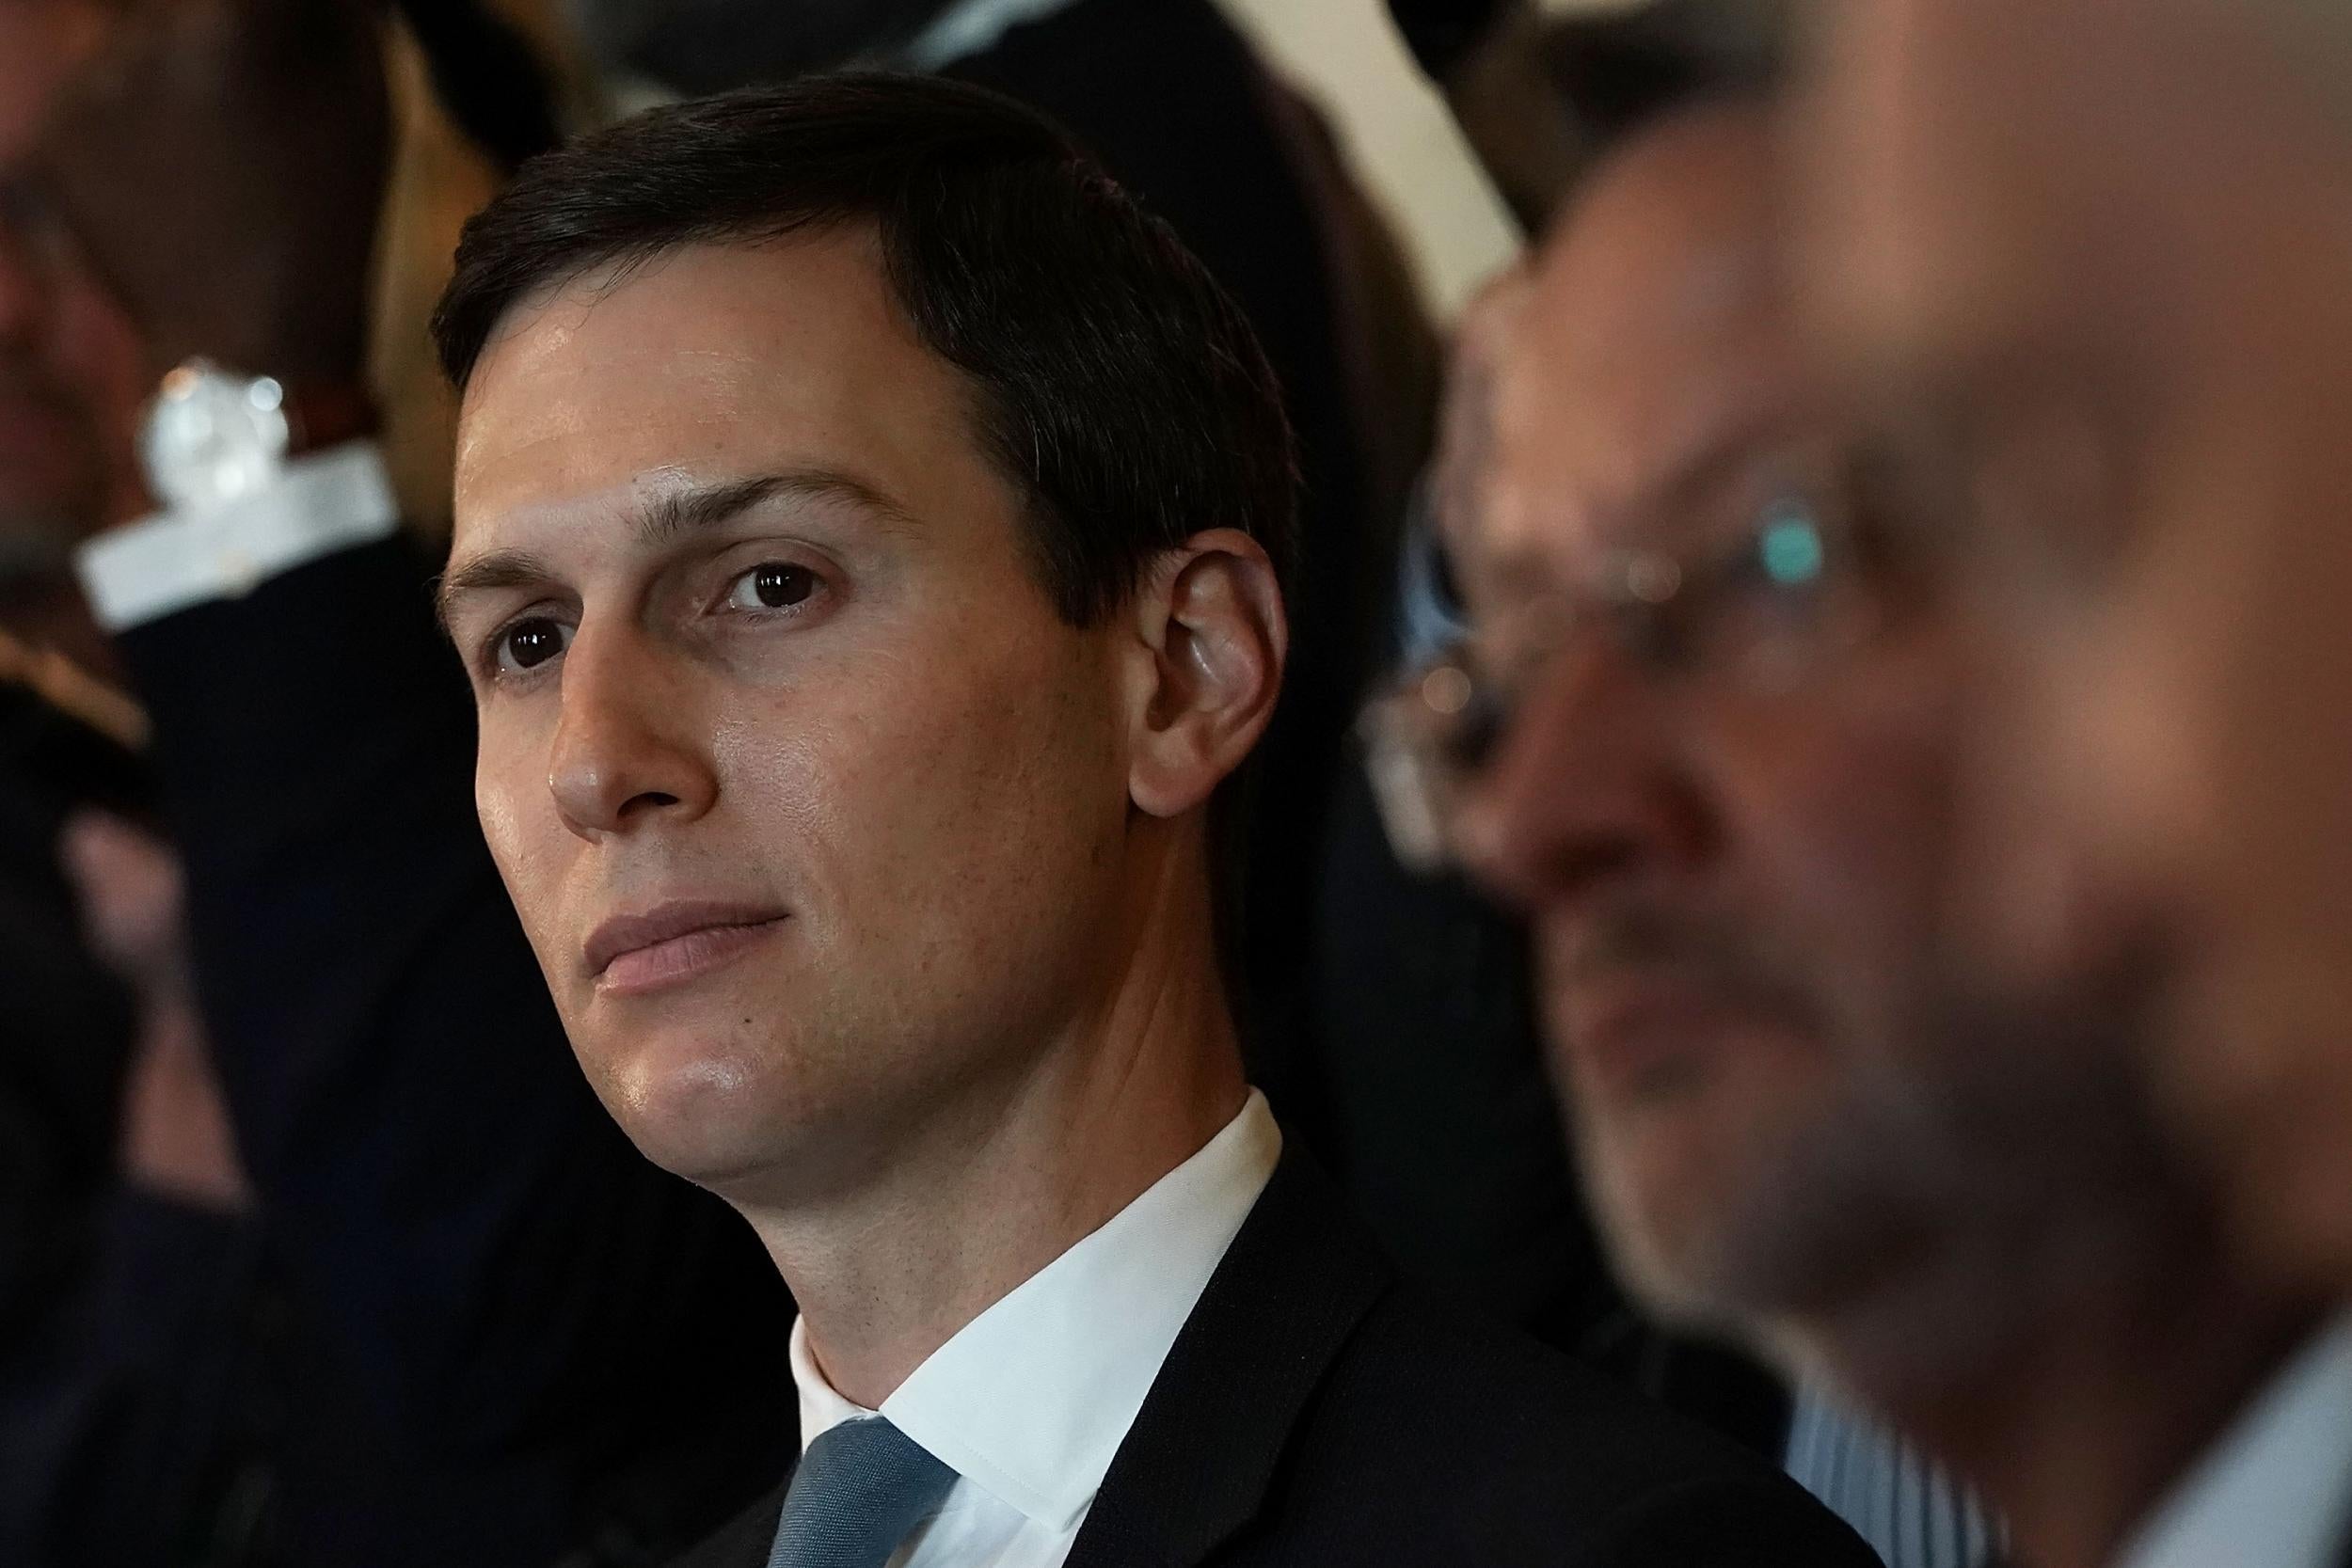 Mr Kushner is no longer involved with the day to day operations of the company